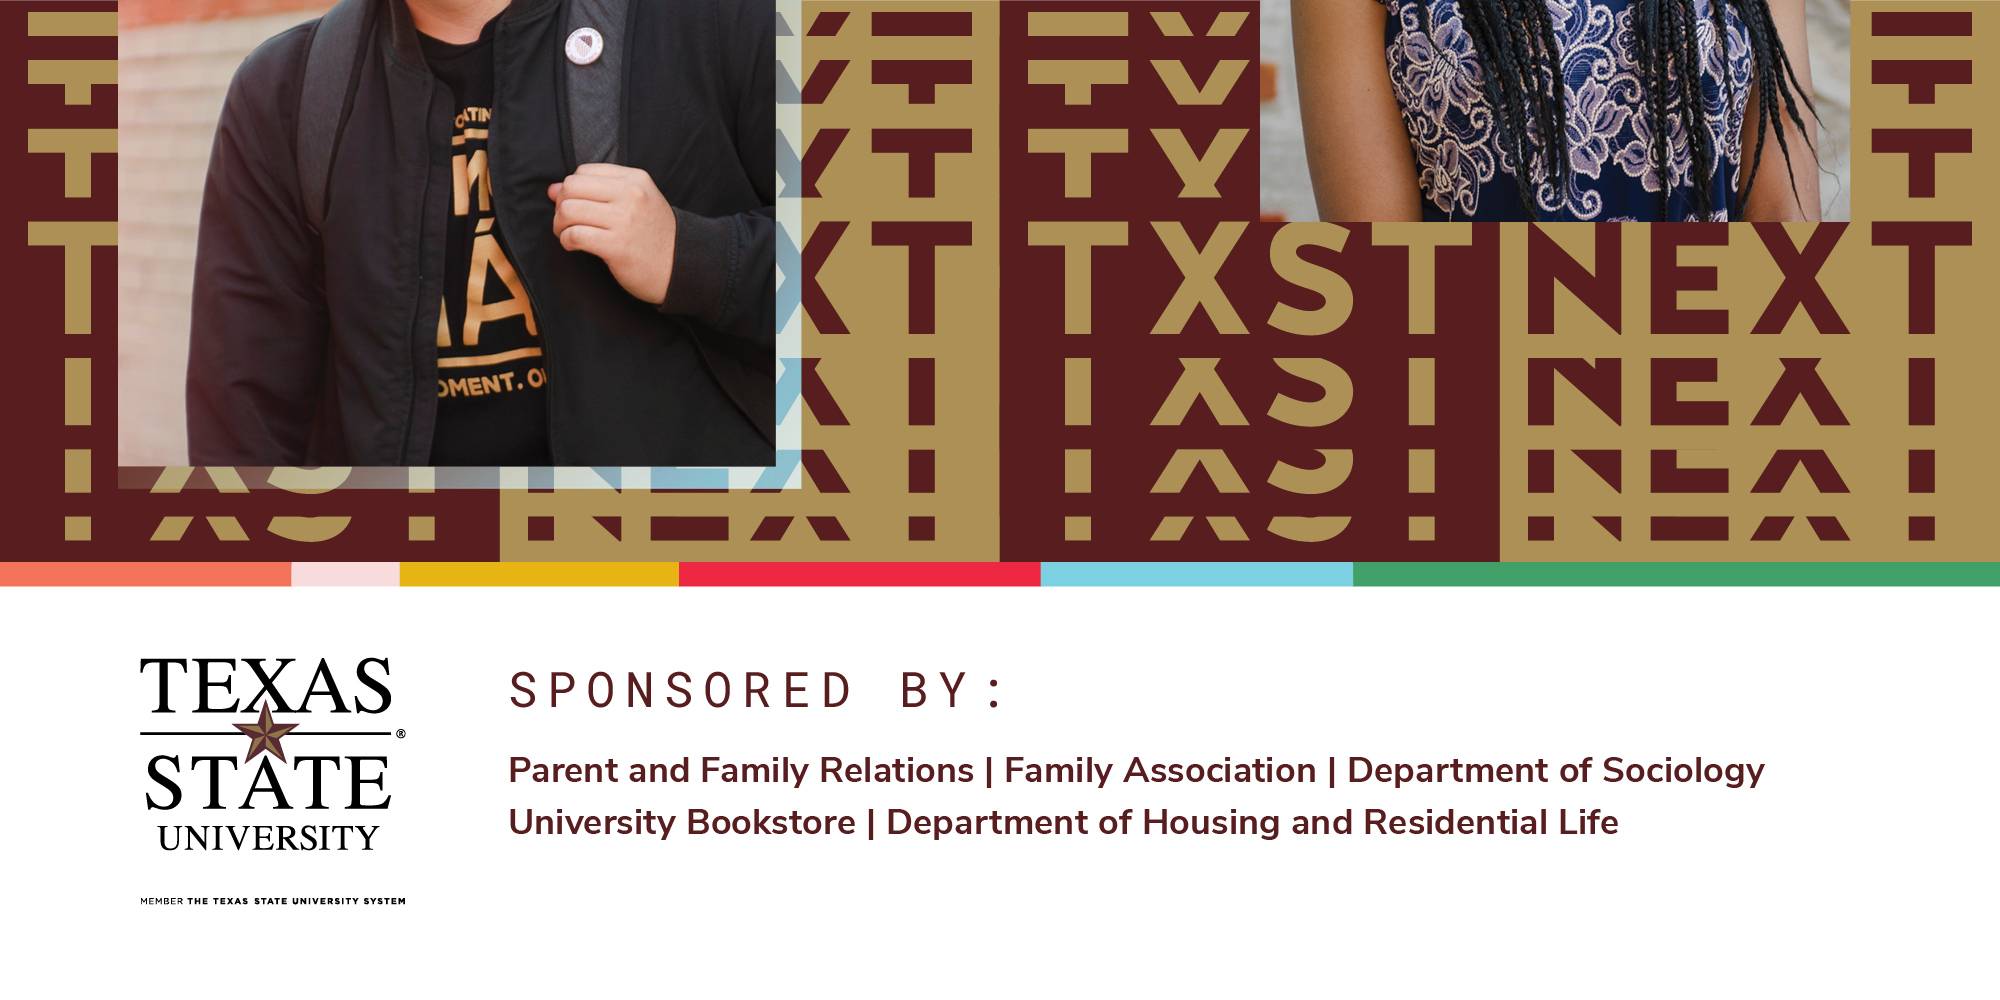 A Texas State University logo next to copy that says "Sponsored by" names of departments